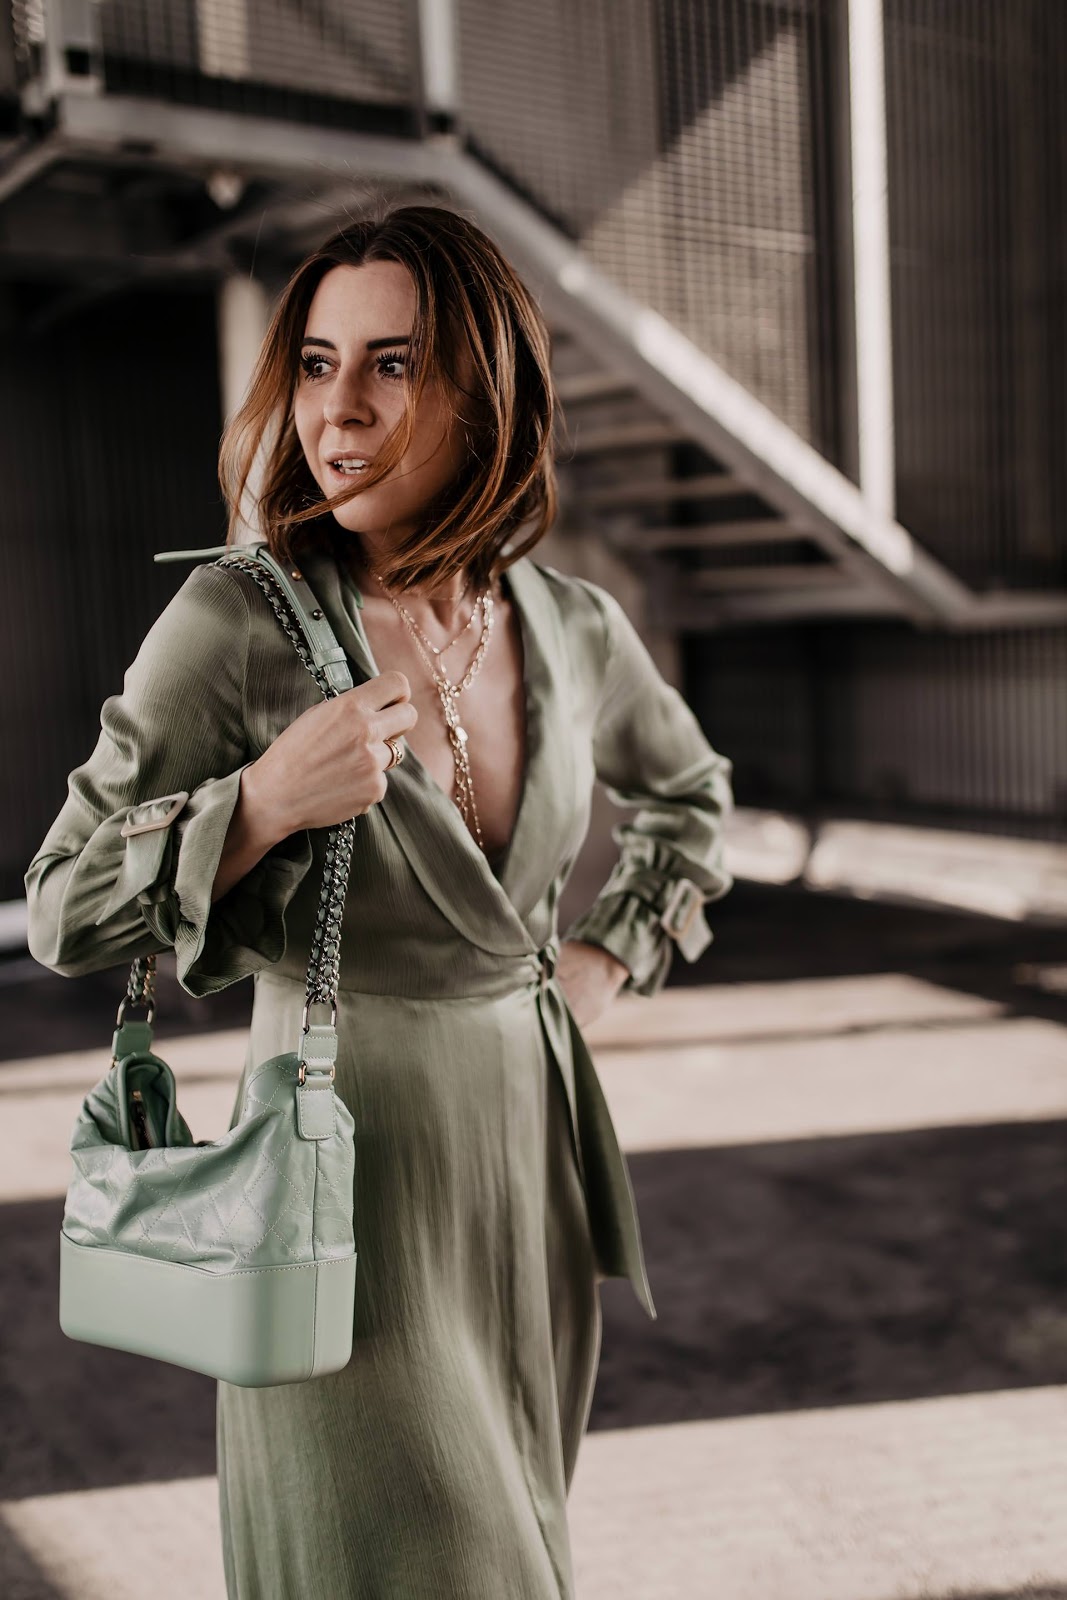 Spring Outfit & Light Green Outfit - Fashion Inspiration | Cool Chic ...